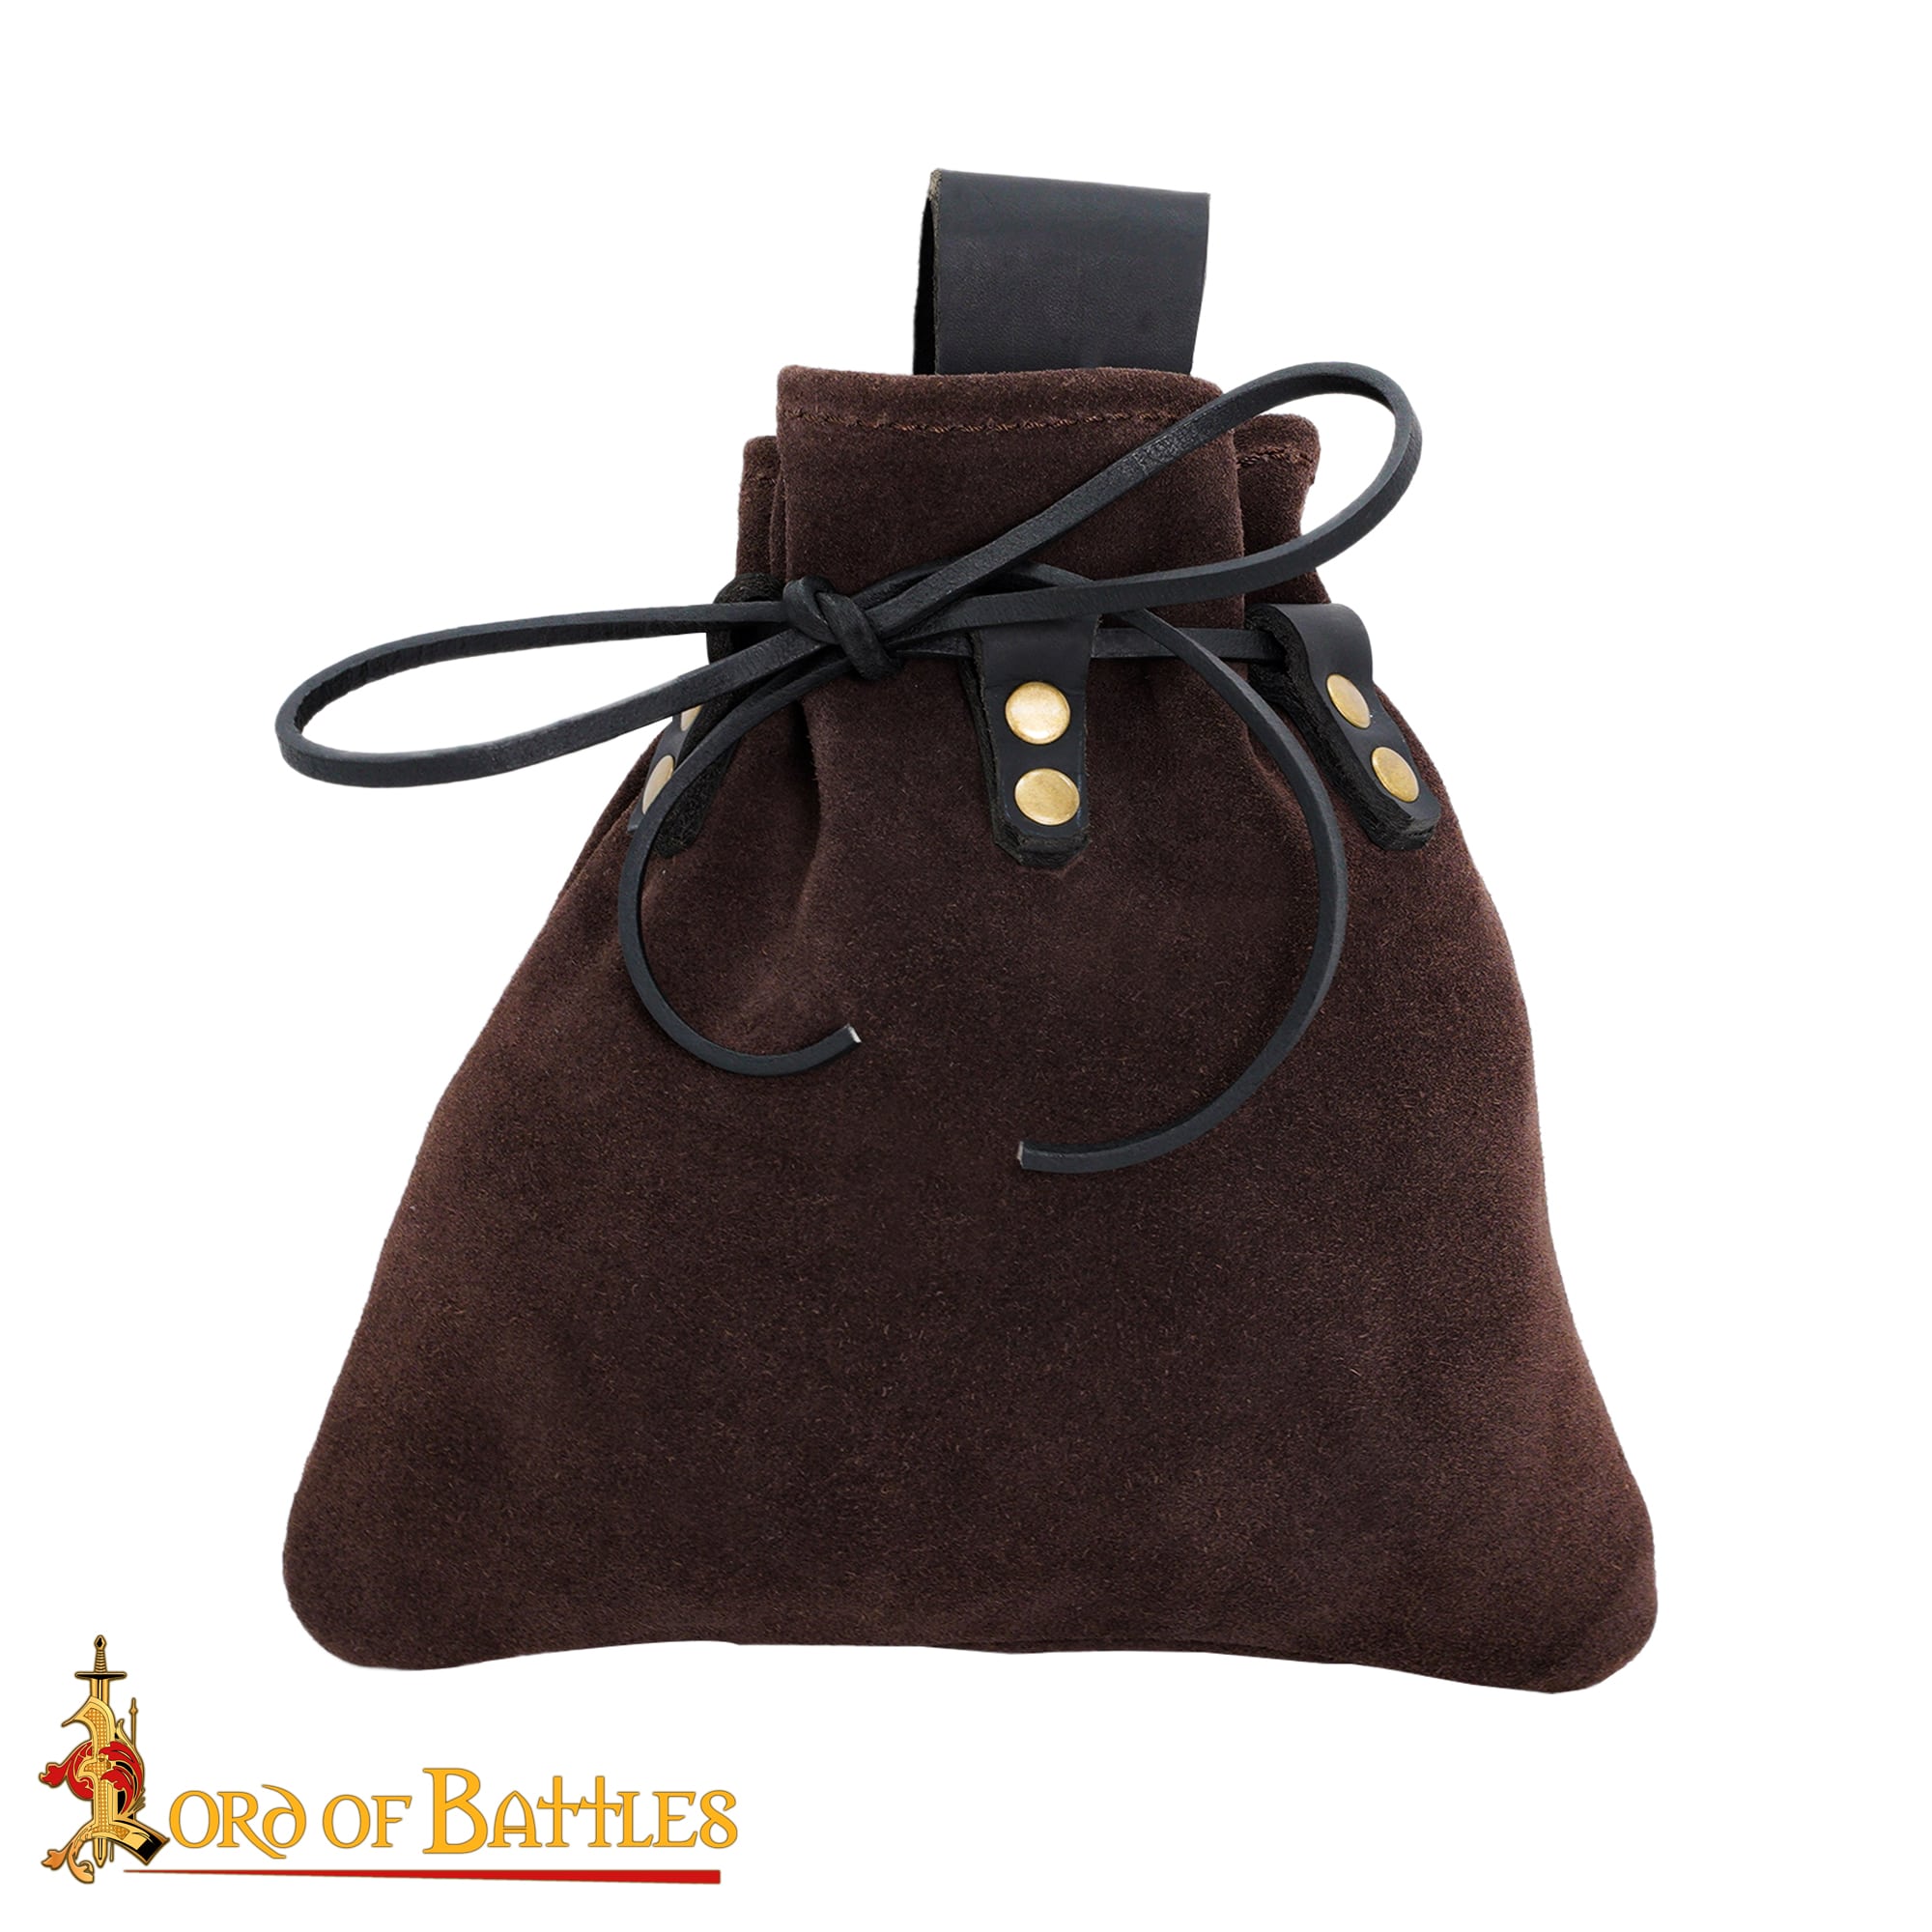 Medieval Drawstring Belt Pouch - Handcrafted Genuine Suede Leather - Brown